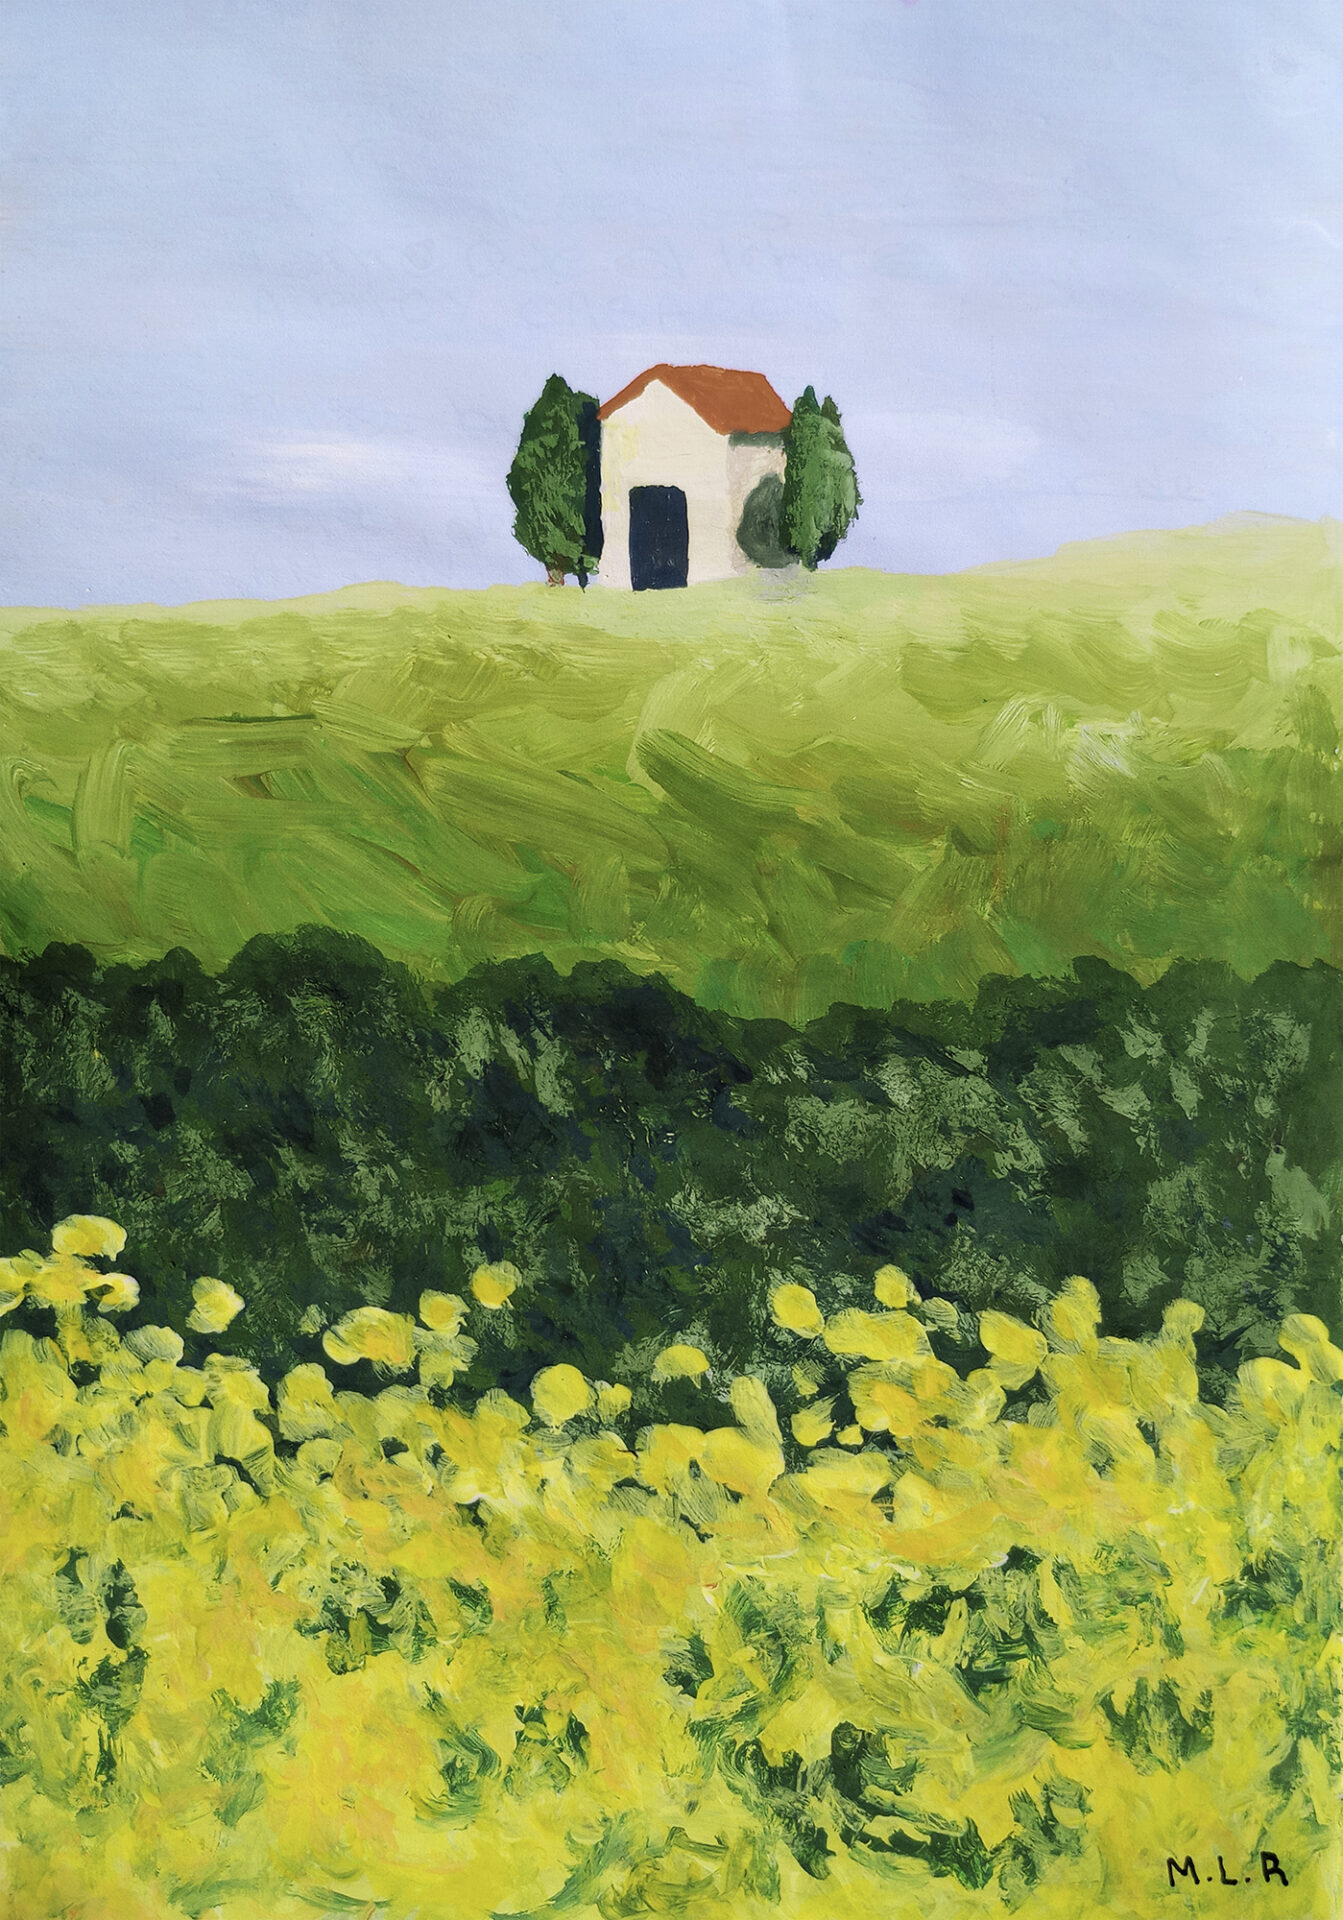 Gouache painting with a little house over a hill and a forest with yellow flowers at the bottom.